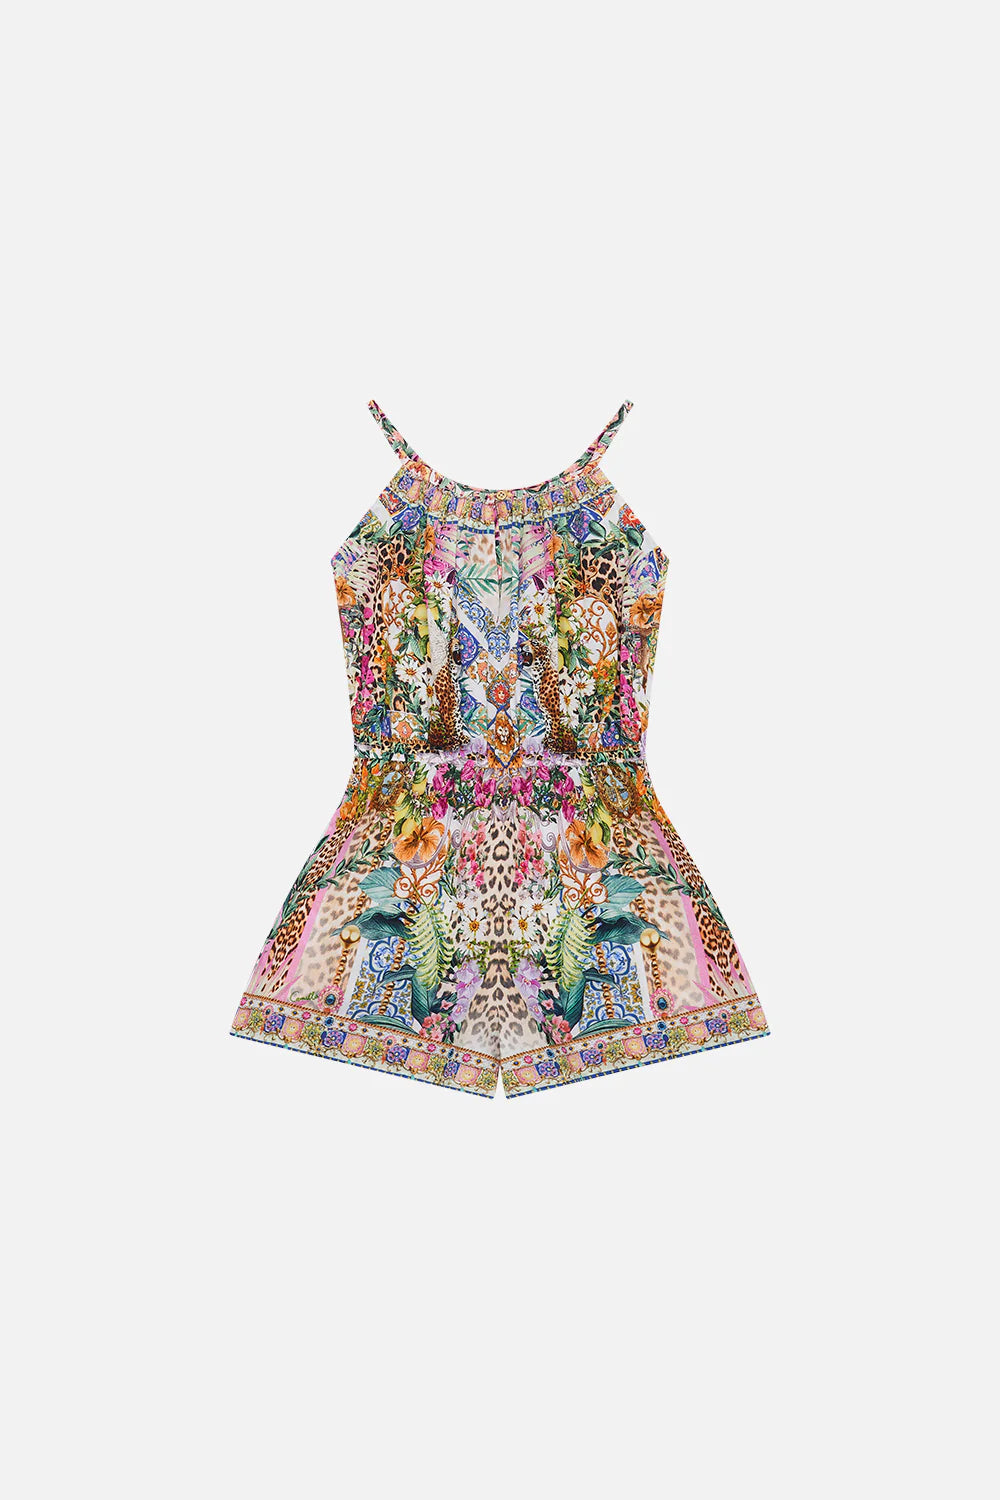 Camilla Flowers Of Neptune Kids  Strap Playsuit